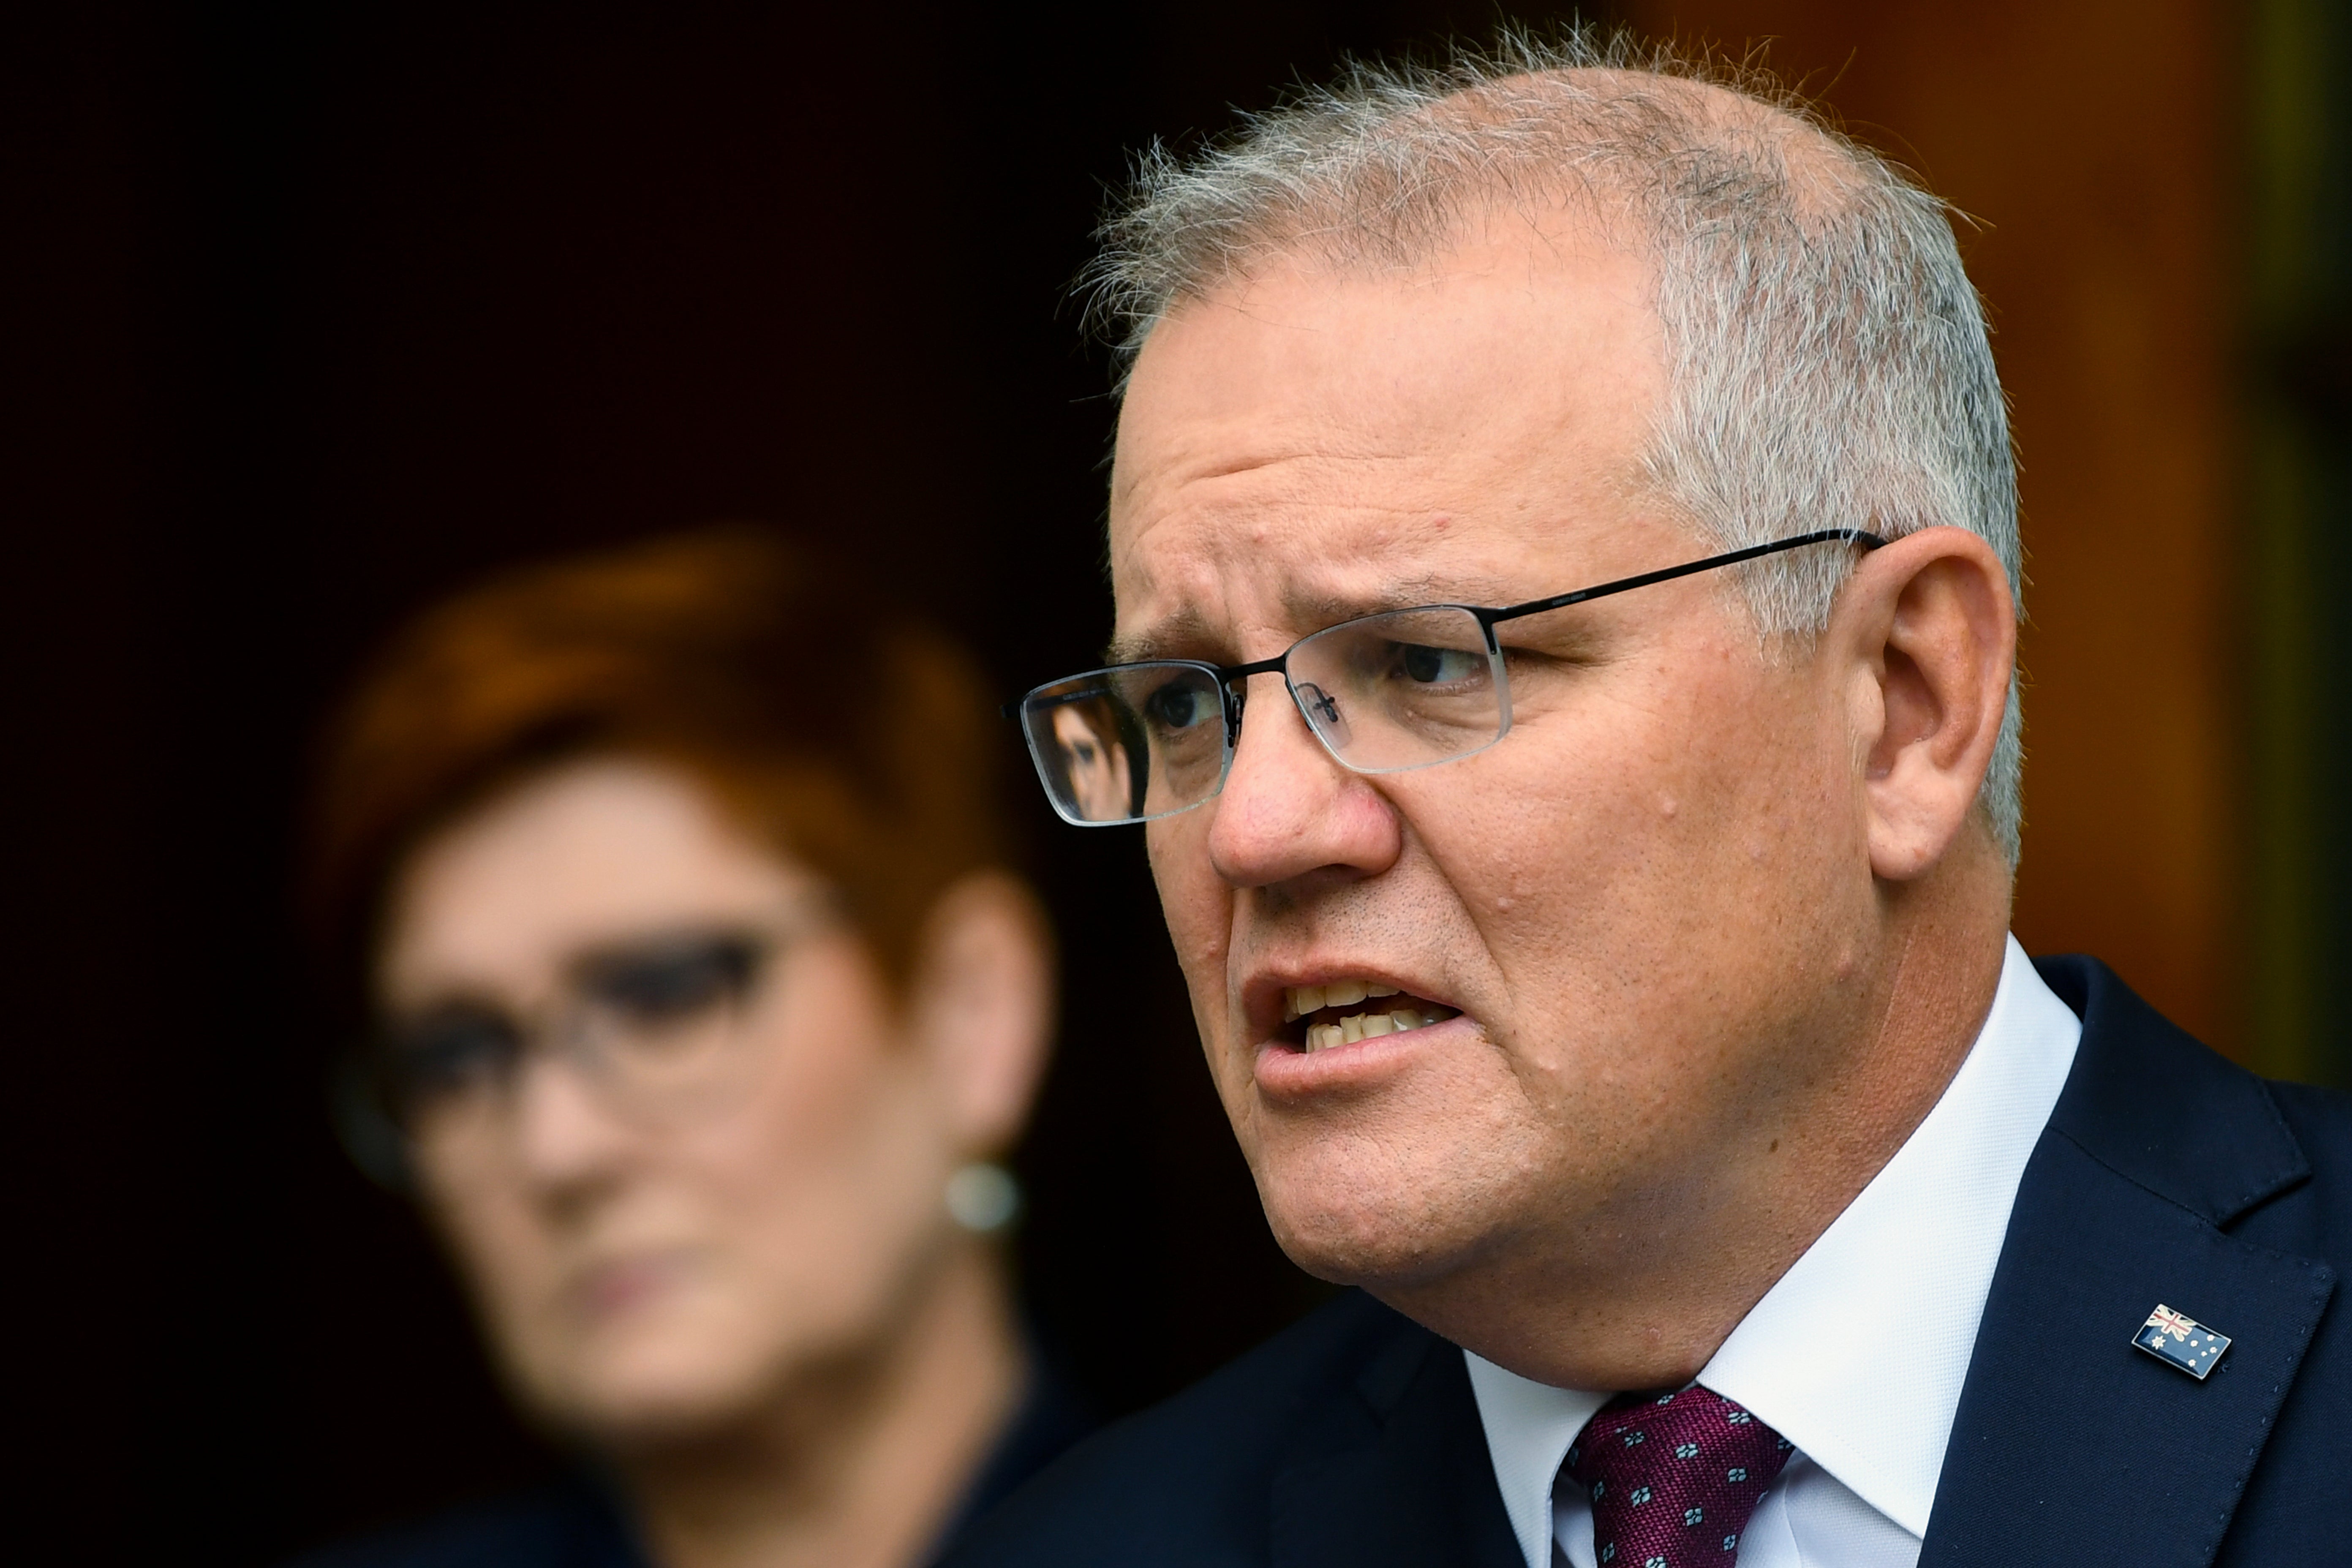 Australian Prime Minister Scott Morrison on Wednesday announced Covid-19 vaccination support for Papua New Guinea